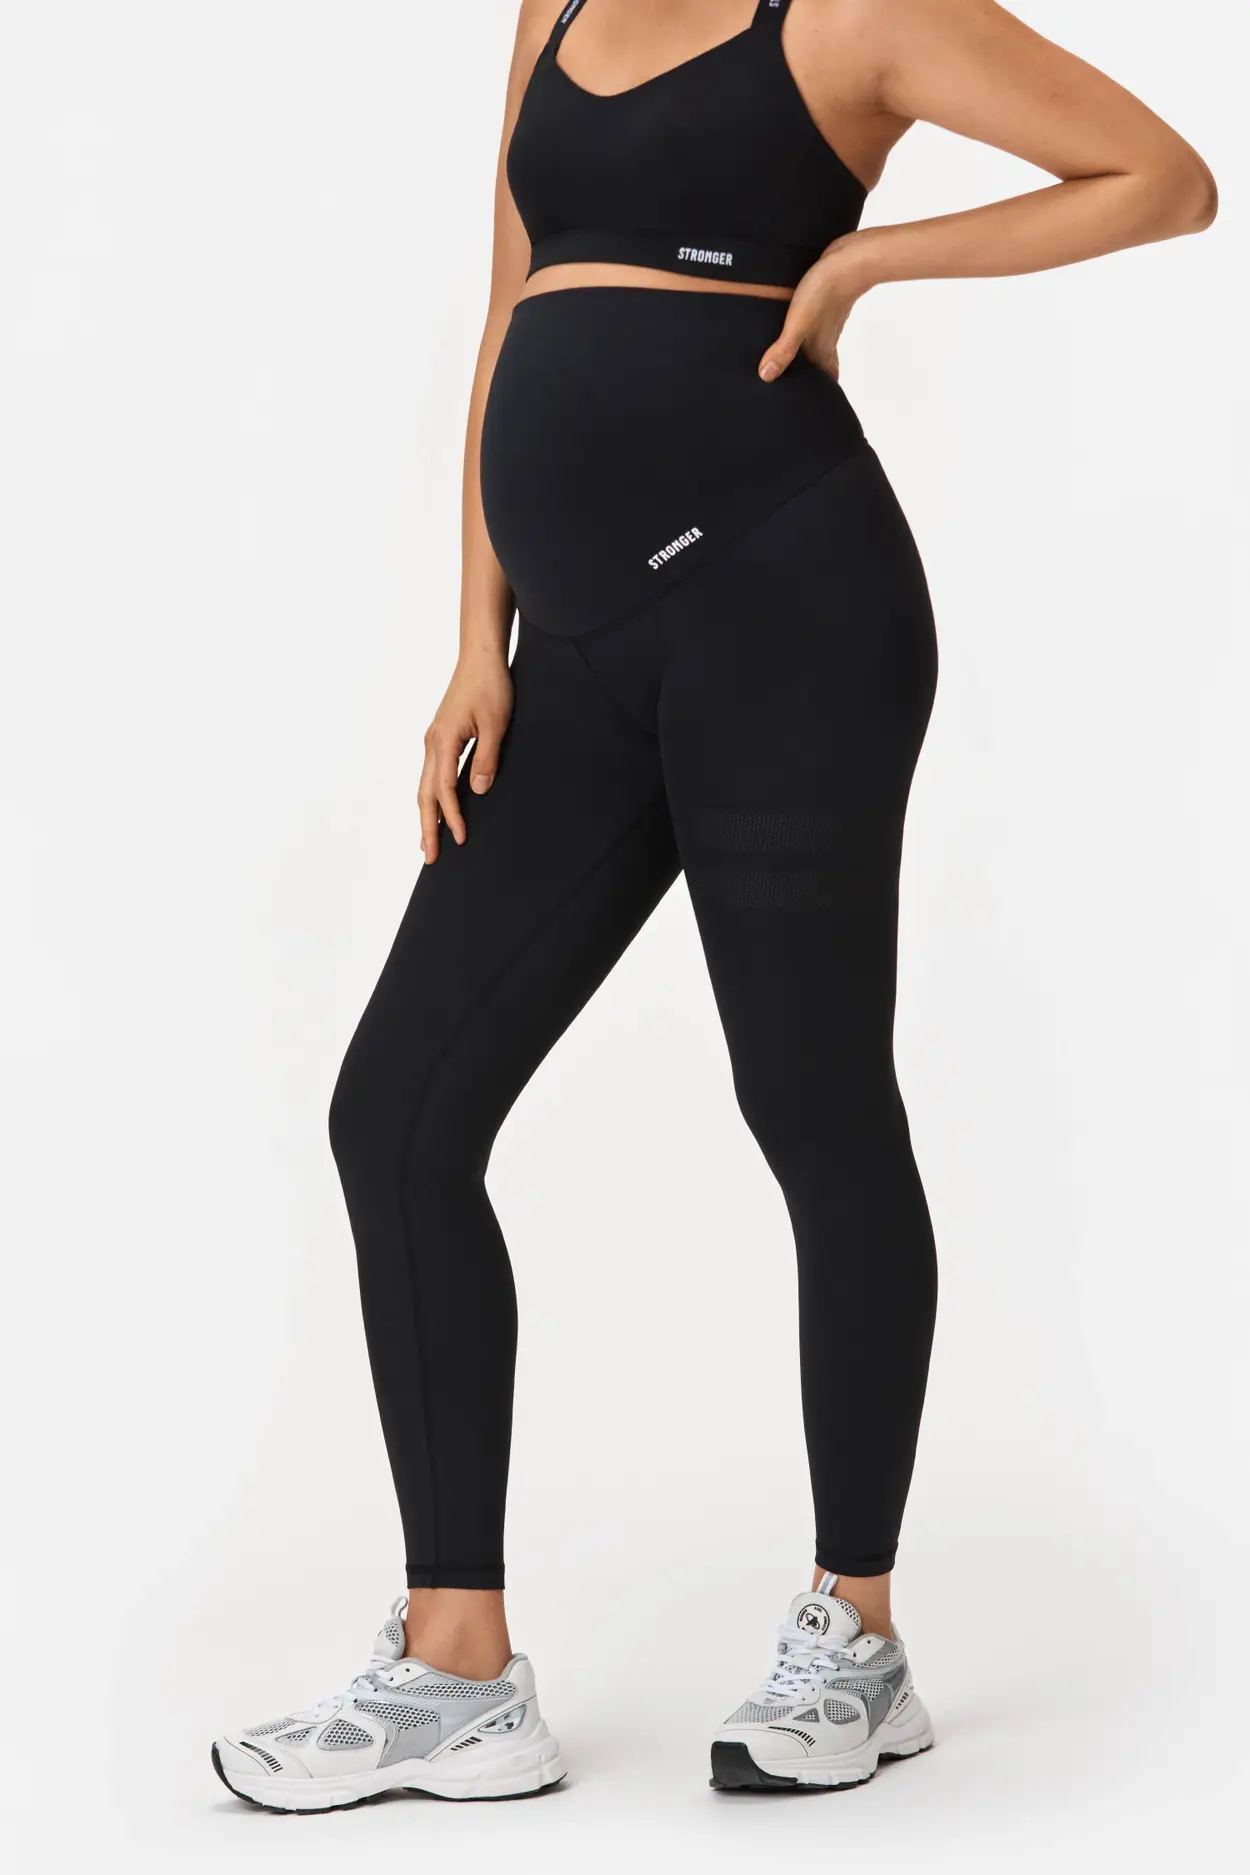 Soft Thermal Fabric Maternity Leggings With Low Waist For